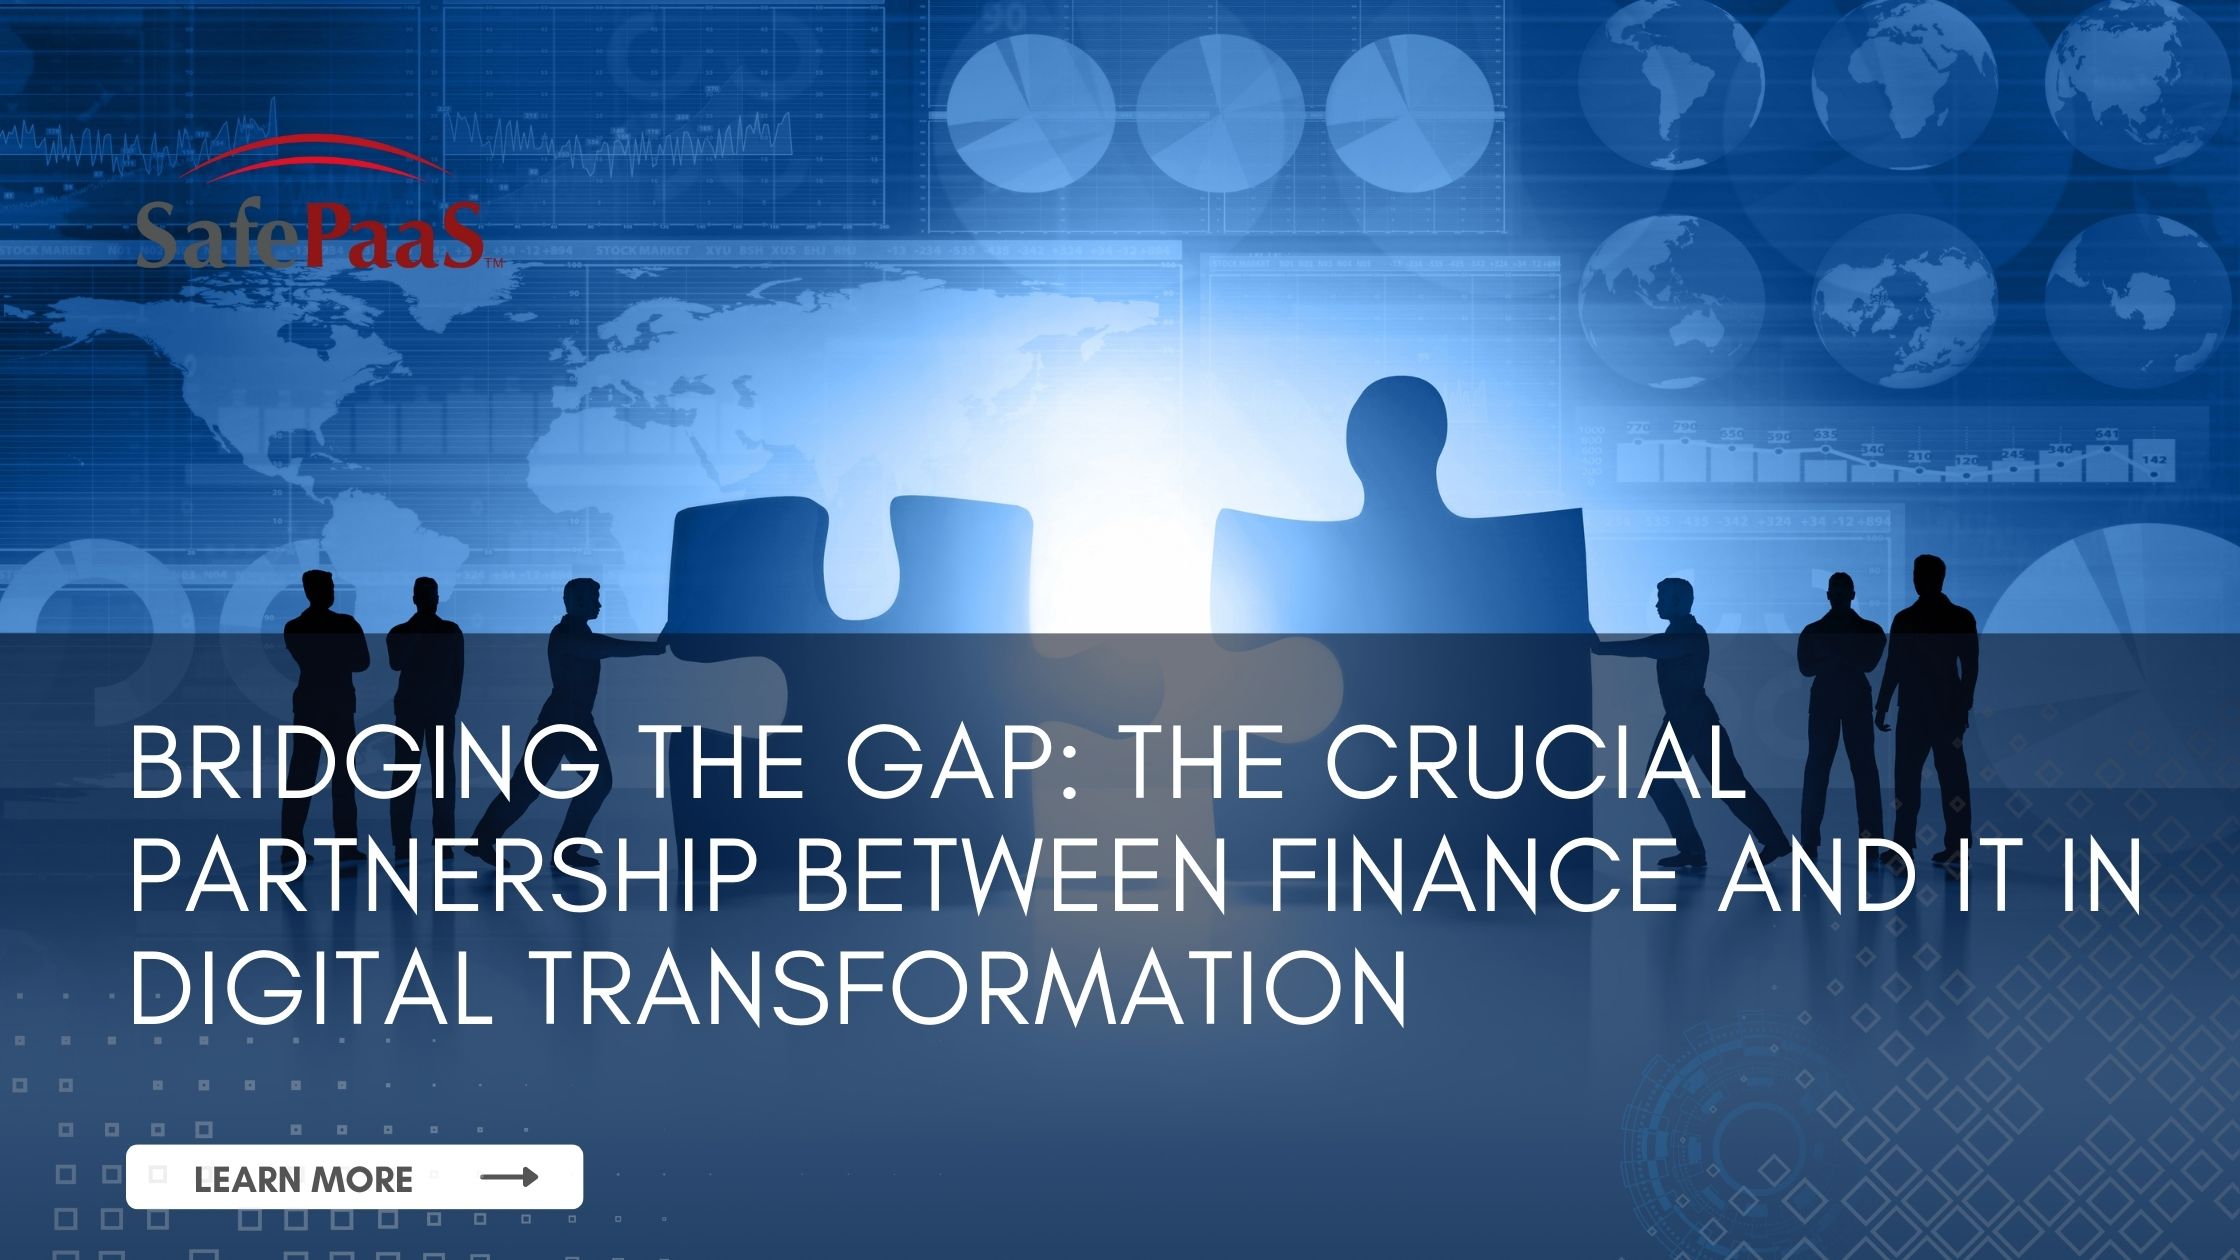 Bridging the Gap The crucial partnership between finance and IT in digital transformation